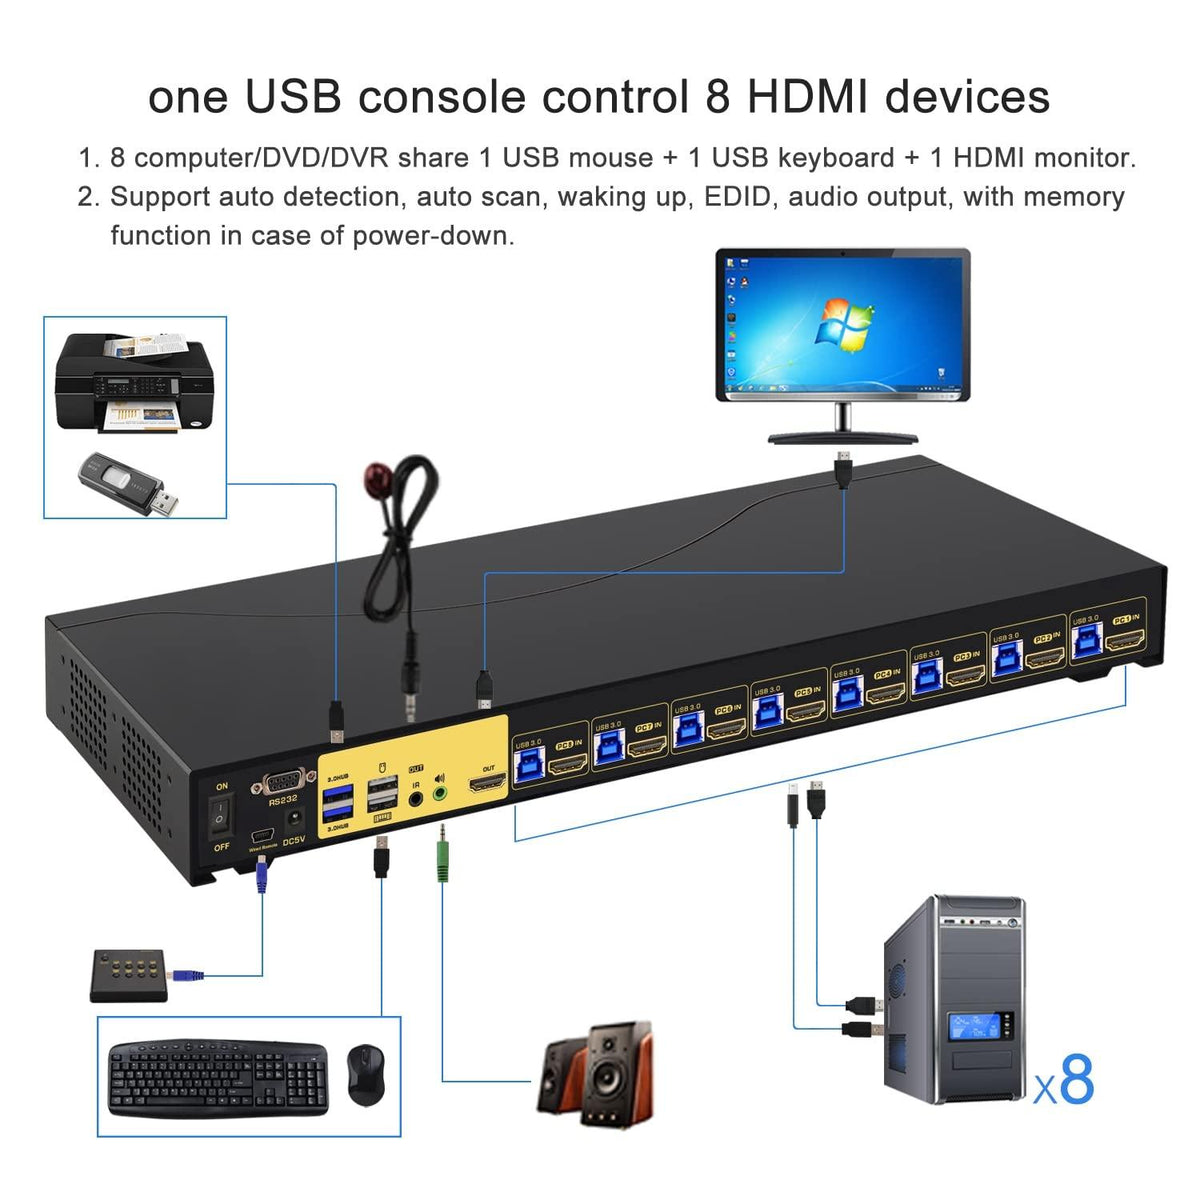 CONTROL UP TO VGA AND USB COMPUTERS FROM A SINGLE KEYBOARD, MOUSE AND  MONITOR